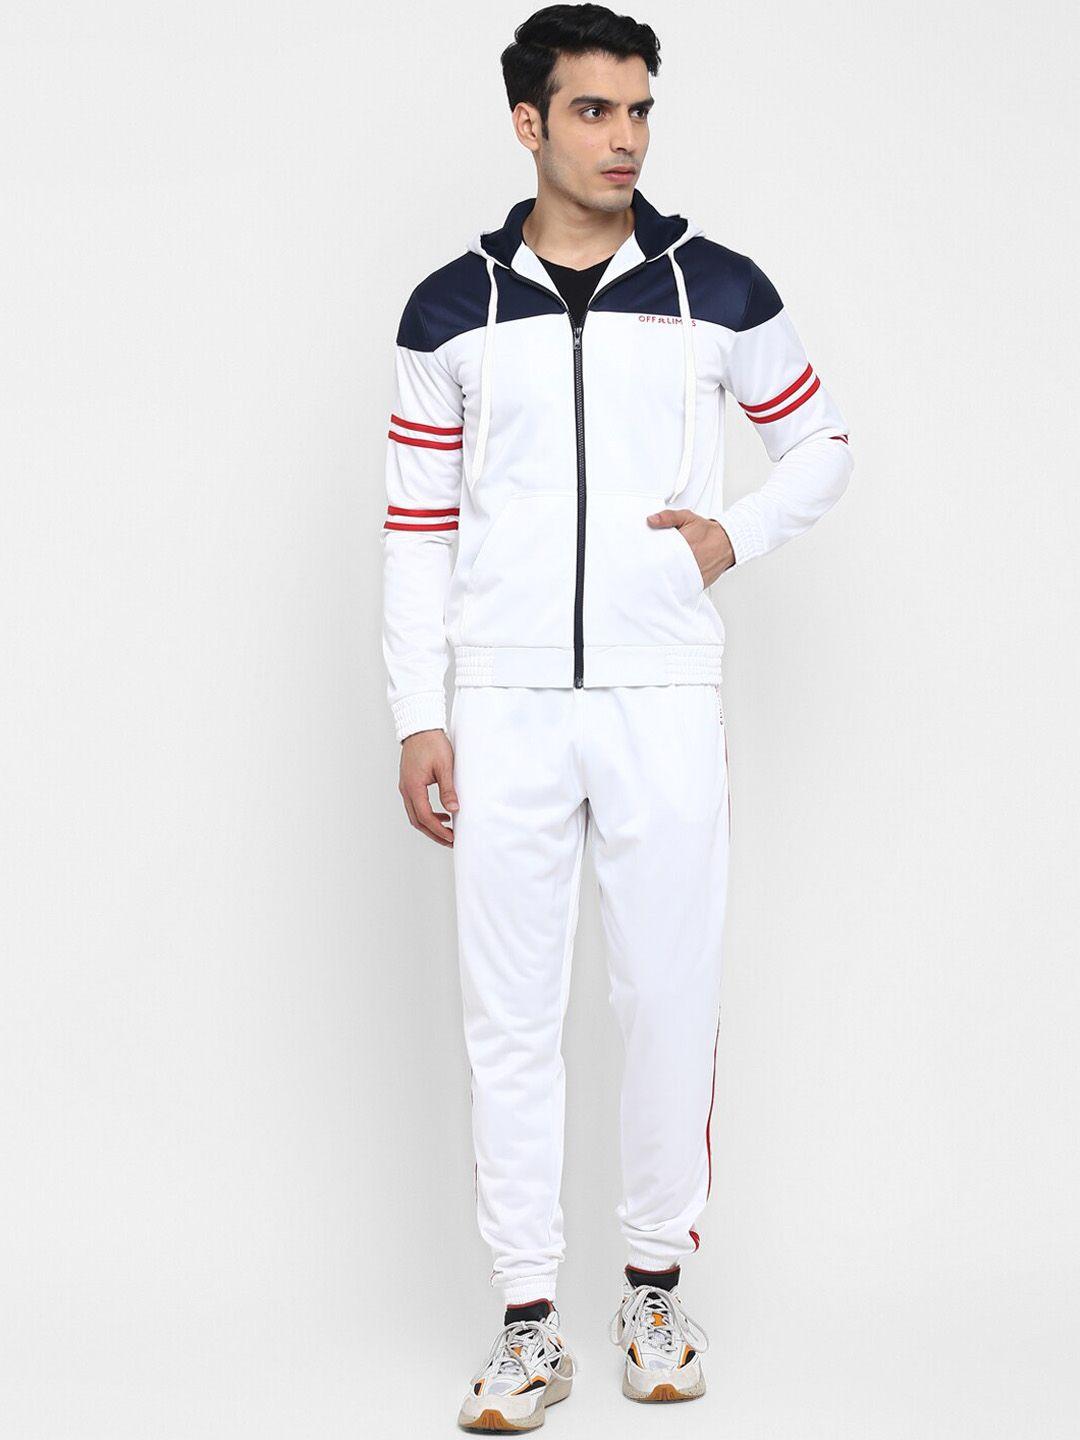 off-limits-men-white-&-red-colourblocked-tracksuit